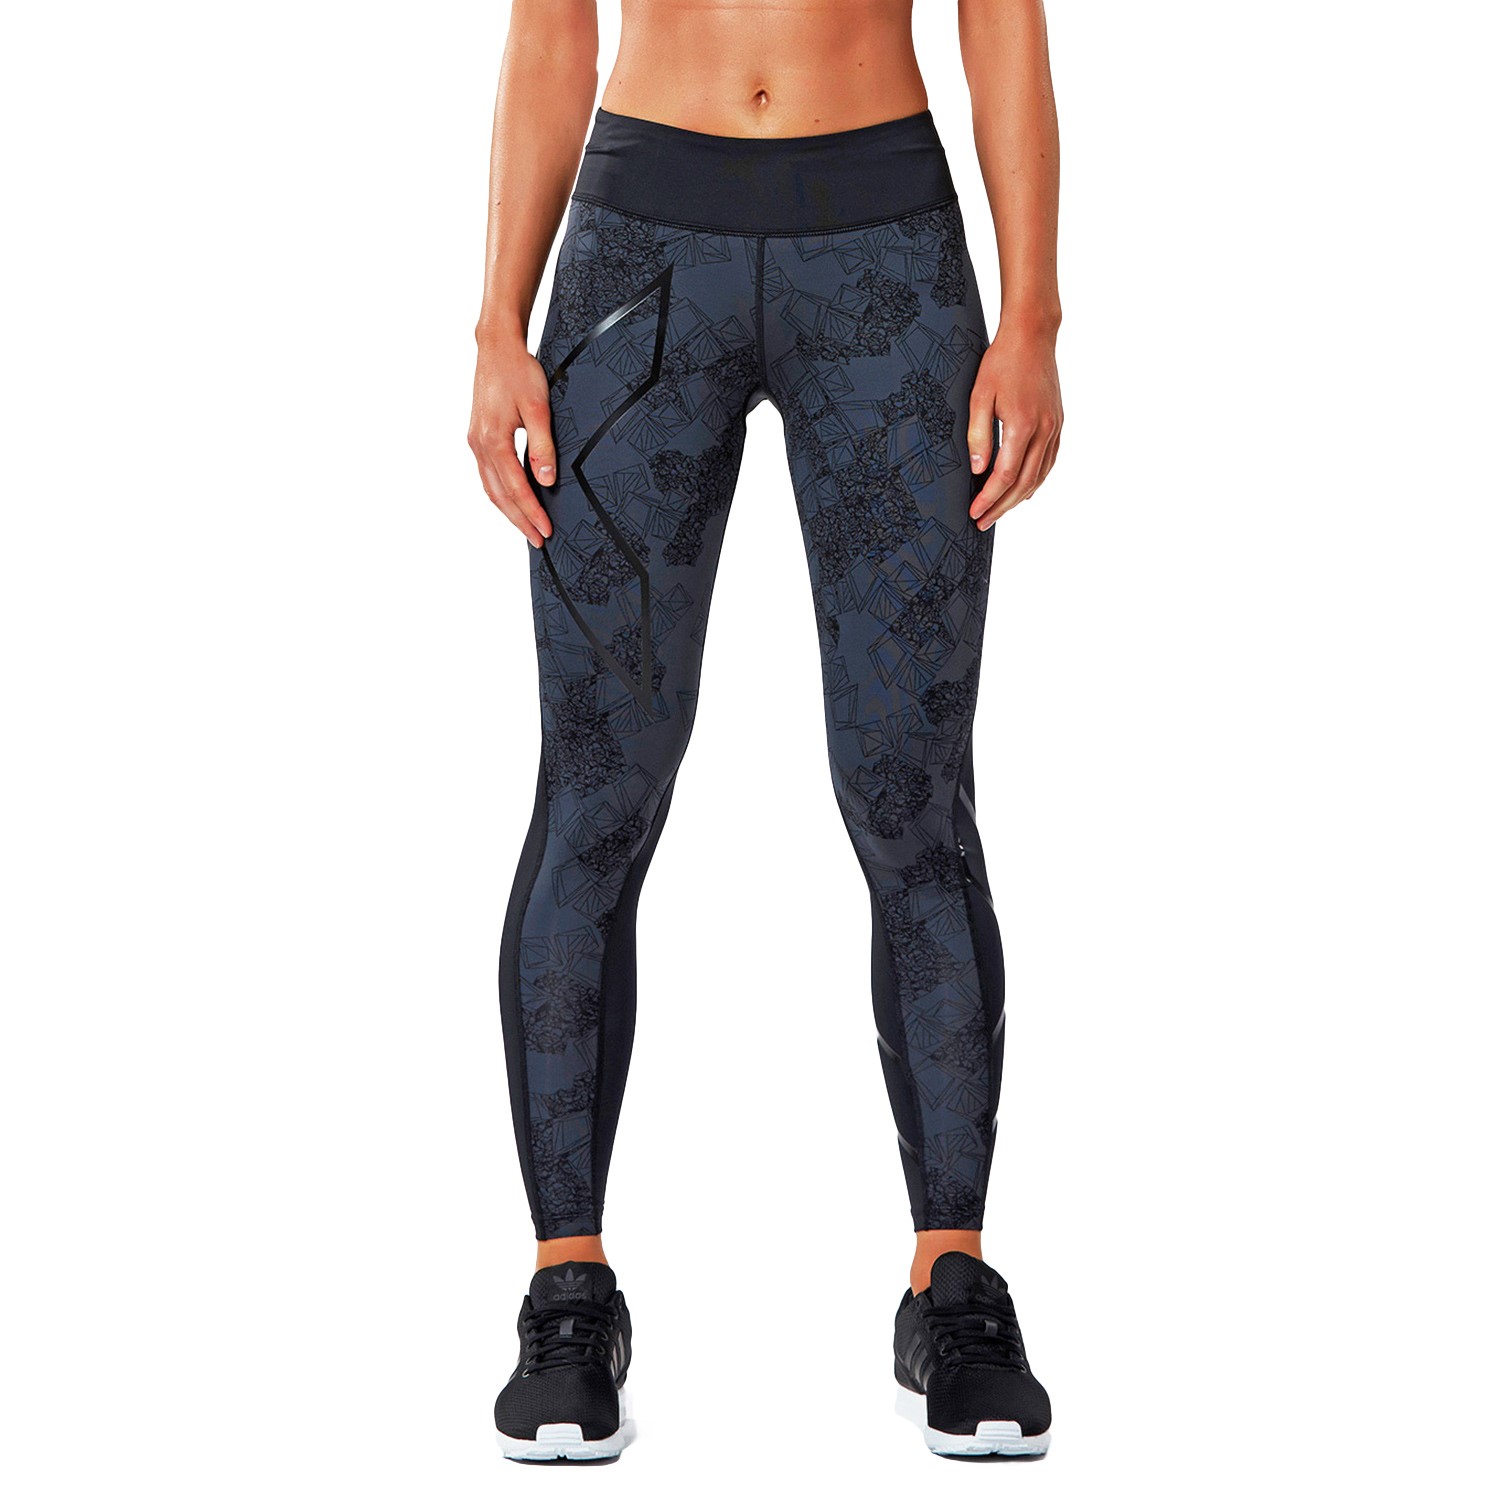 2XU Pattern Mid-Rise Compression Tights - Tights - Athletic apparel - Sport  - Timarco.co.uk